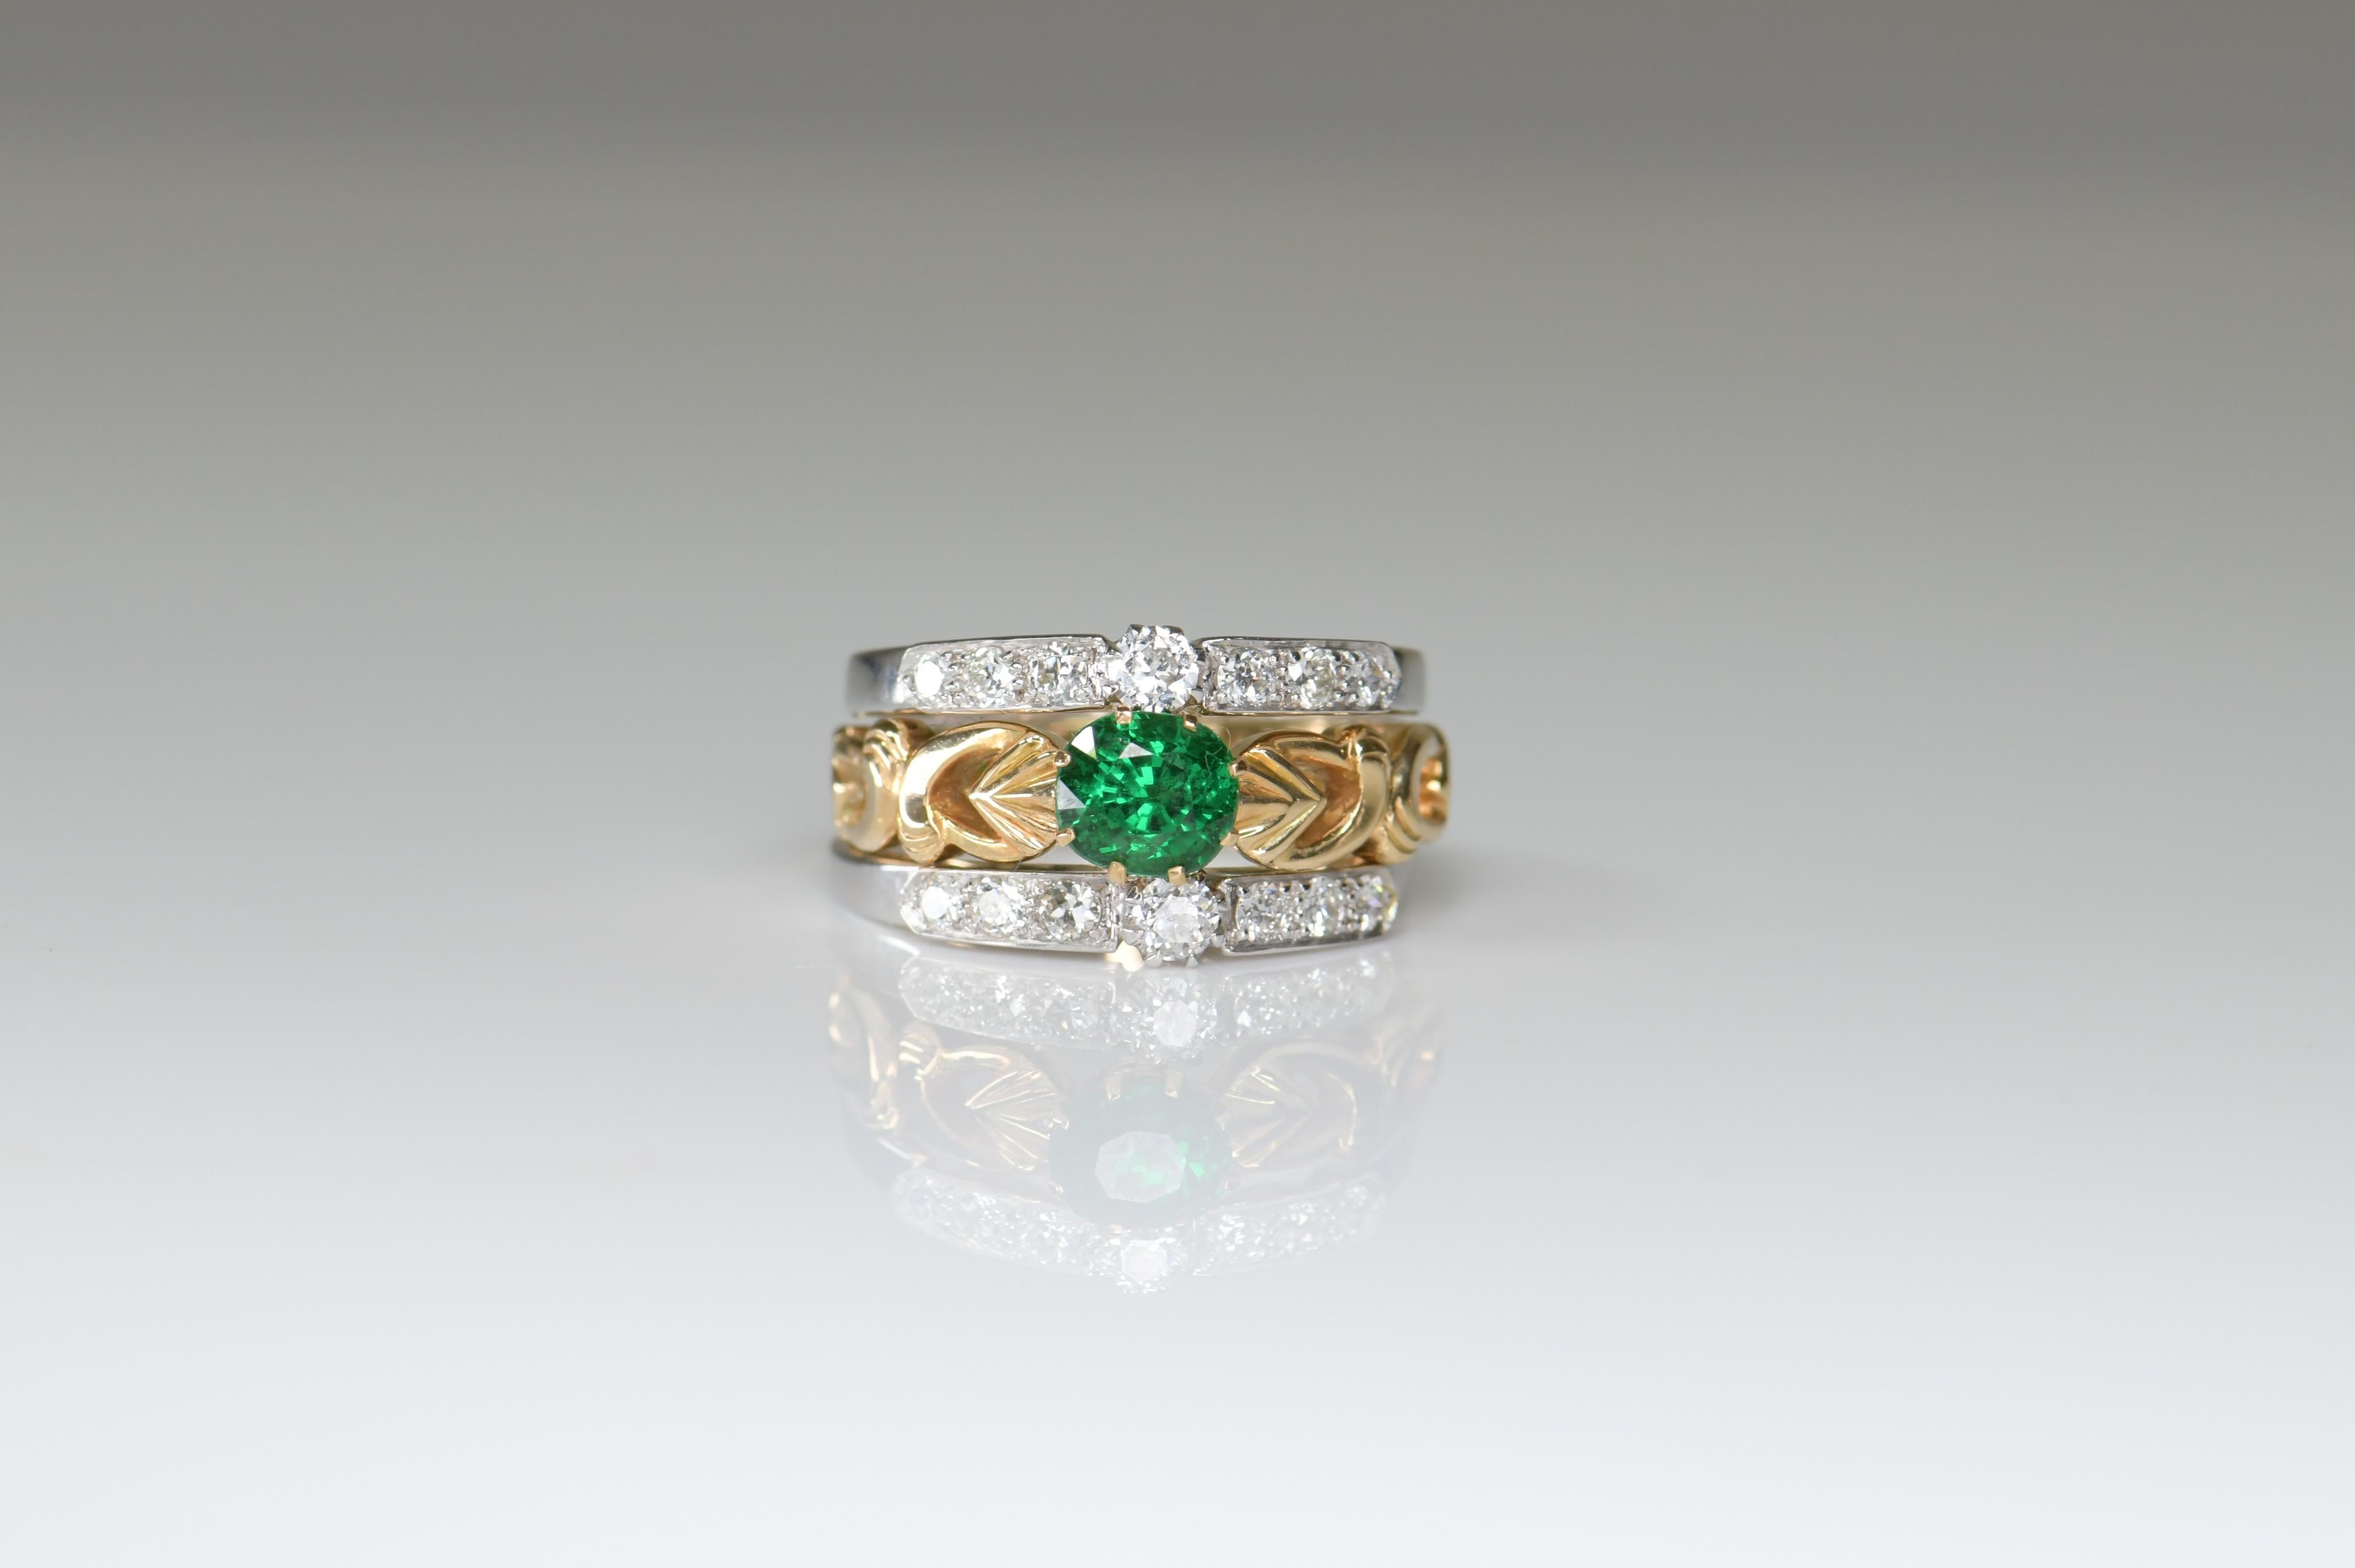 Dazzling three-ring set in 18K yellow and white gold
Top class Tsavorite has got a rich color and strong fire in the stone
1.5ct center Tsavorite stone
Diamond: 0.84 ct
Perfect condition
Size: N UK/ 6.5 US

We have many other fantastic pieces of